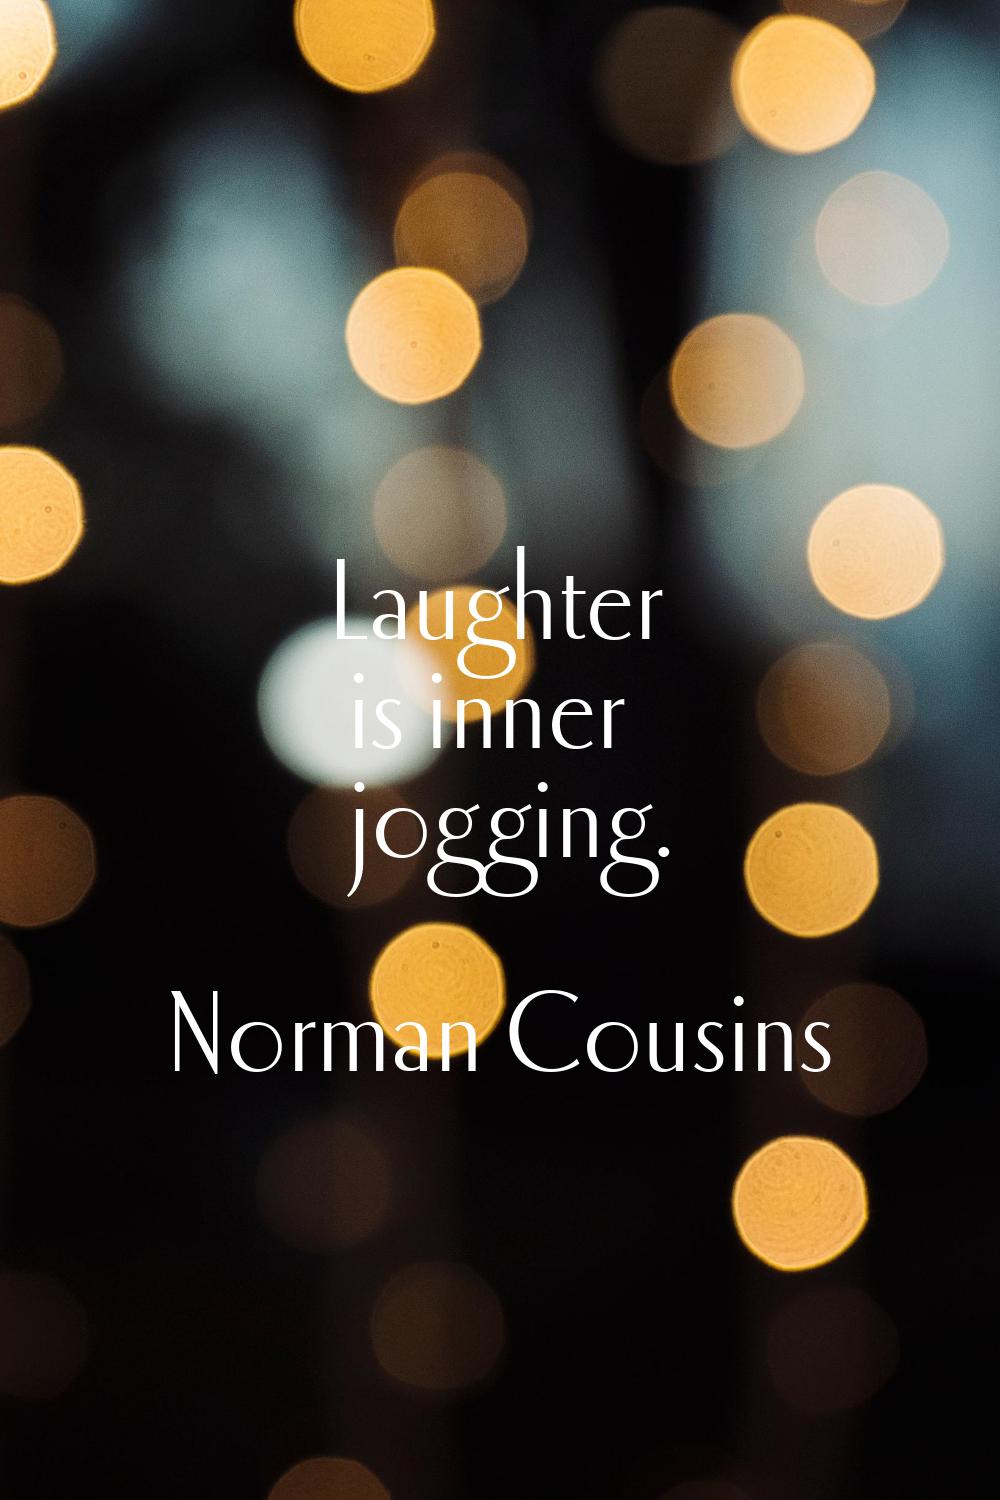 Laughter is inner jogging.